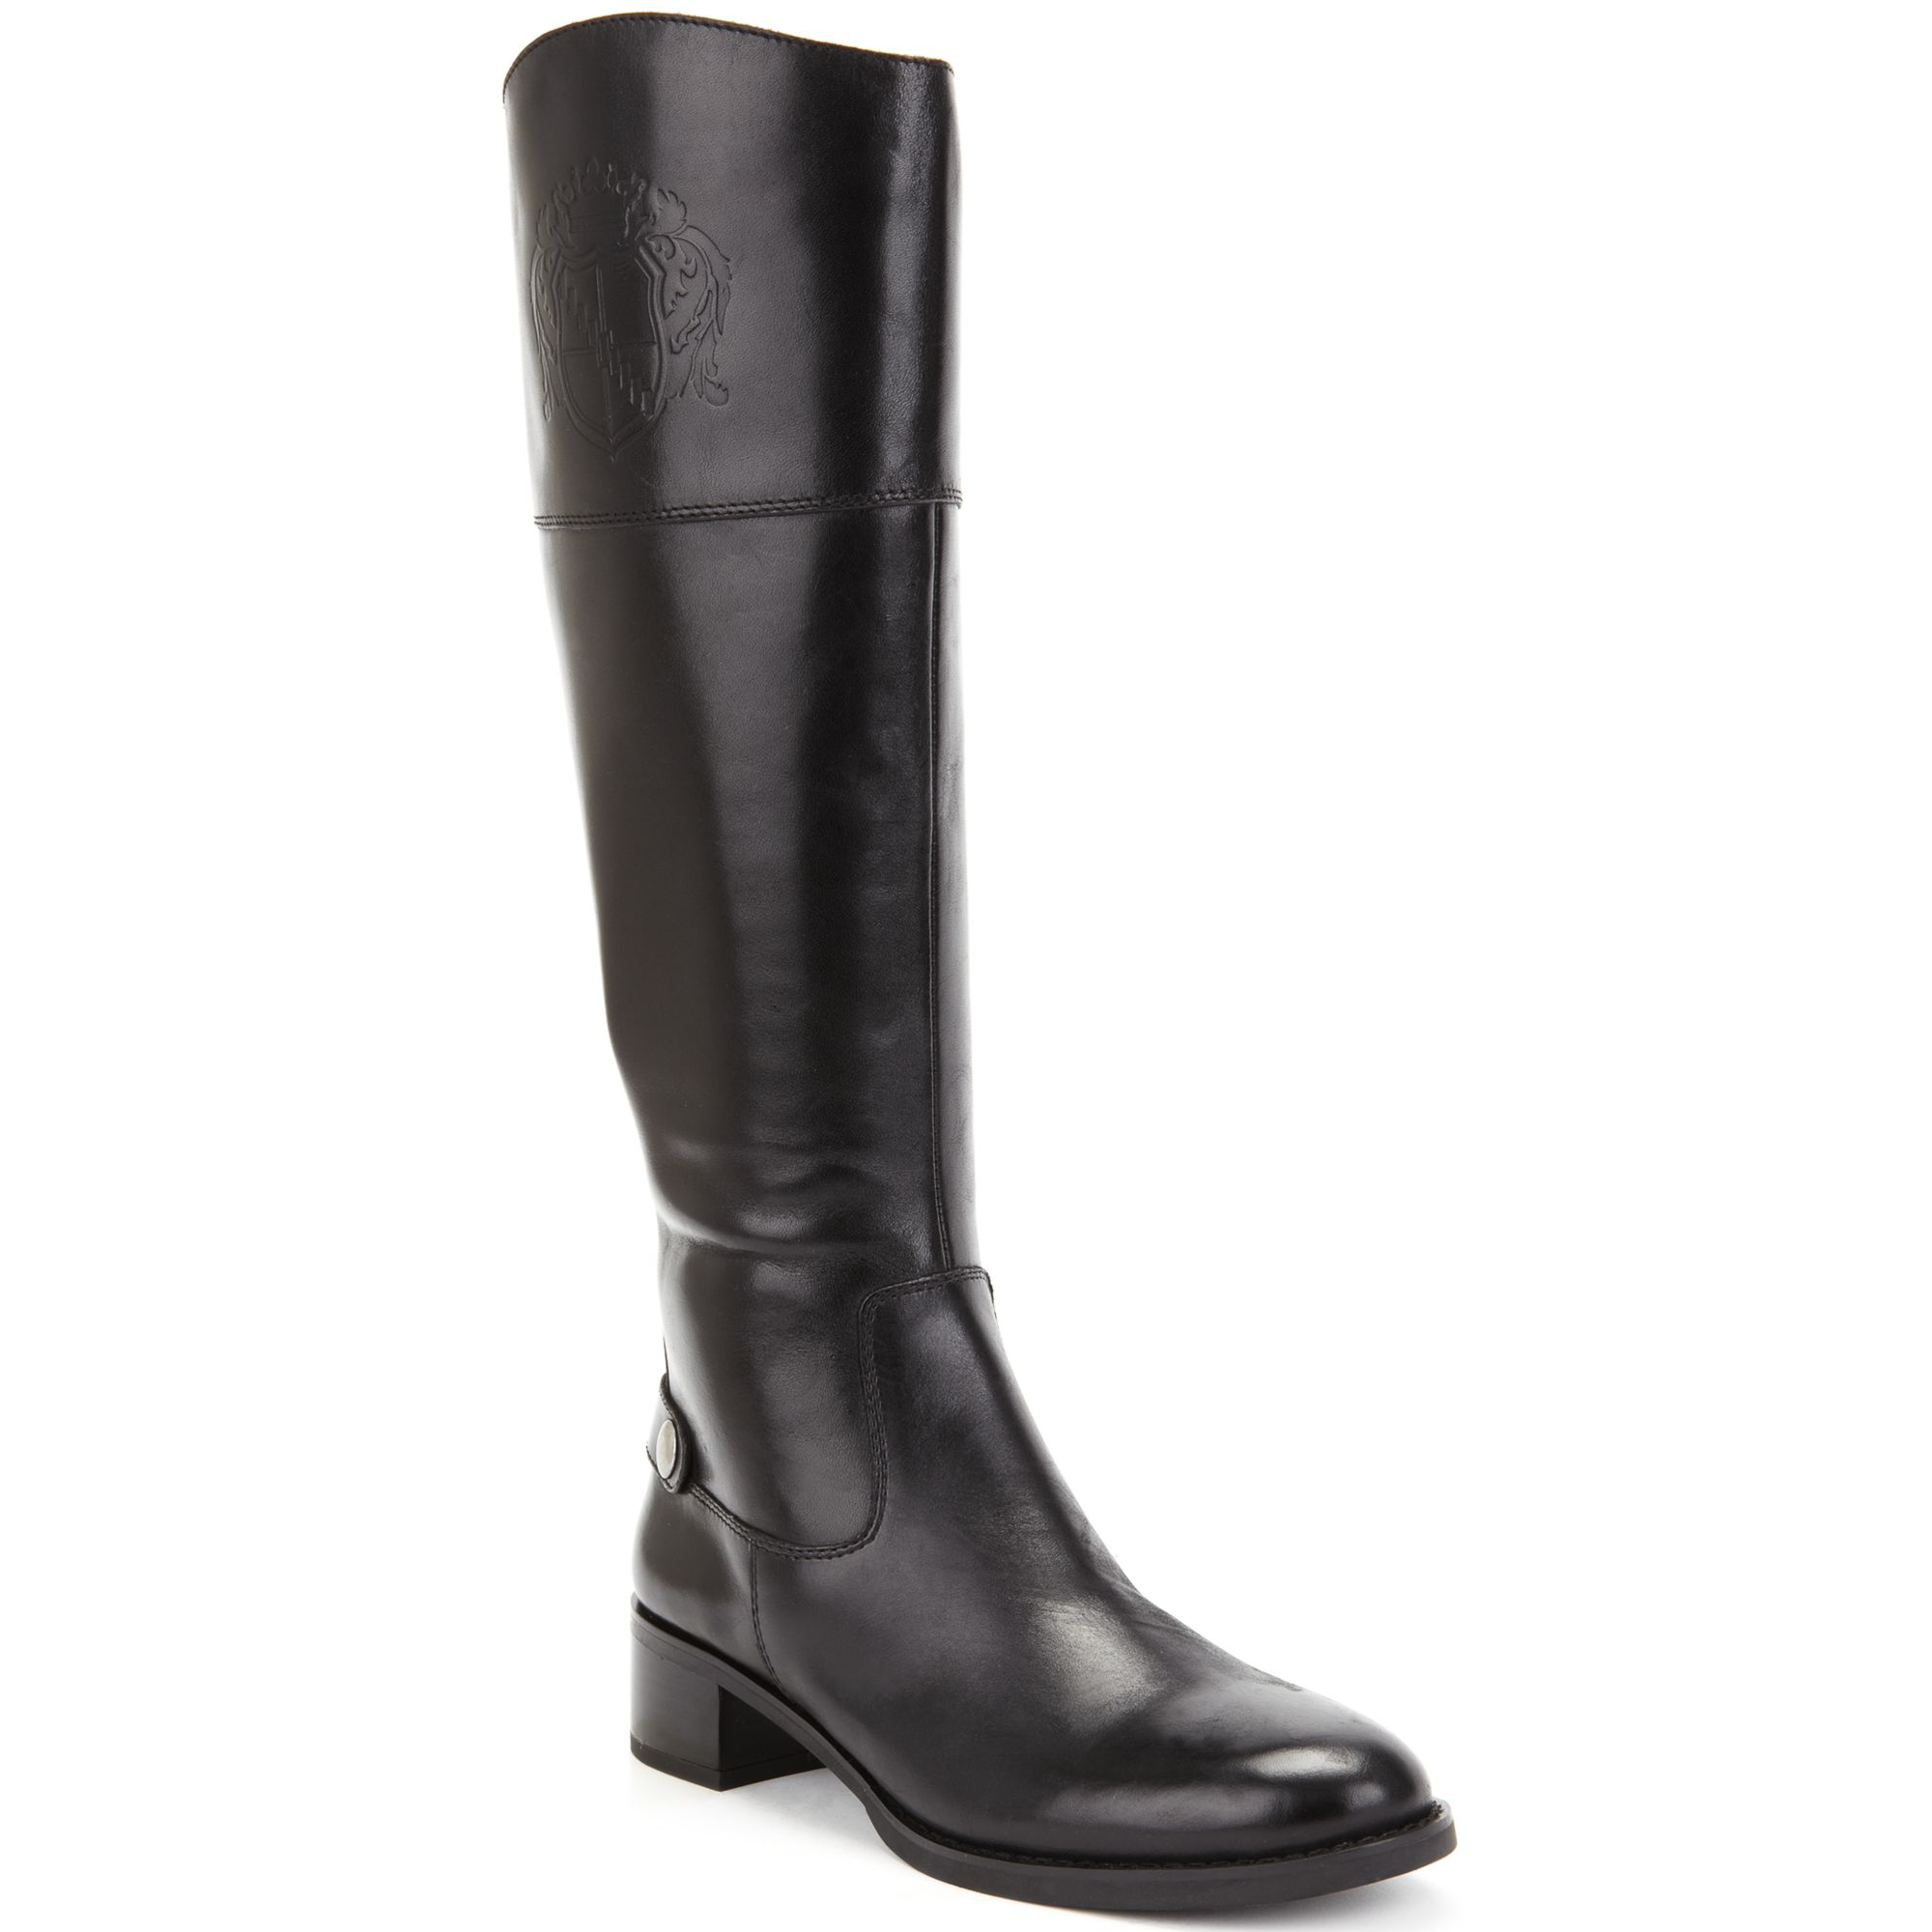 Lyst - Franco sarto Chipper Tall Riding Boots in Black